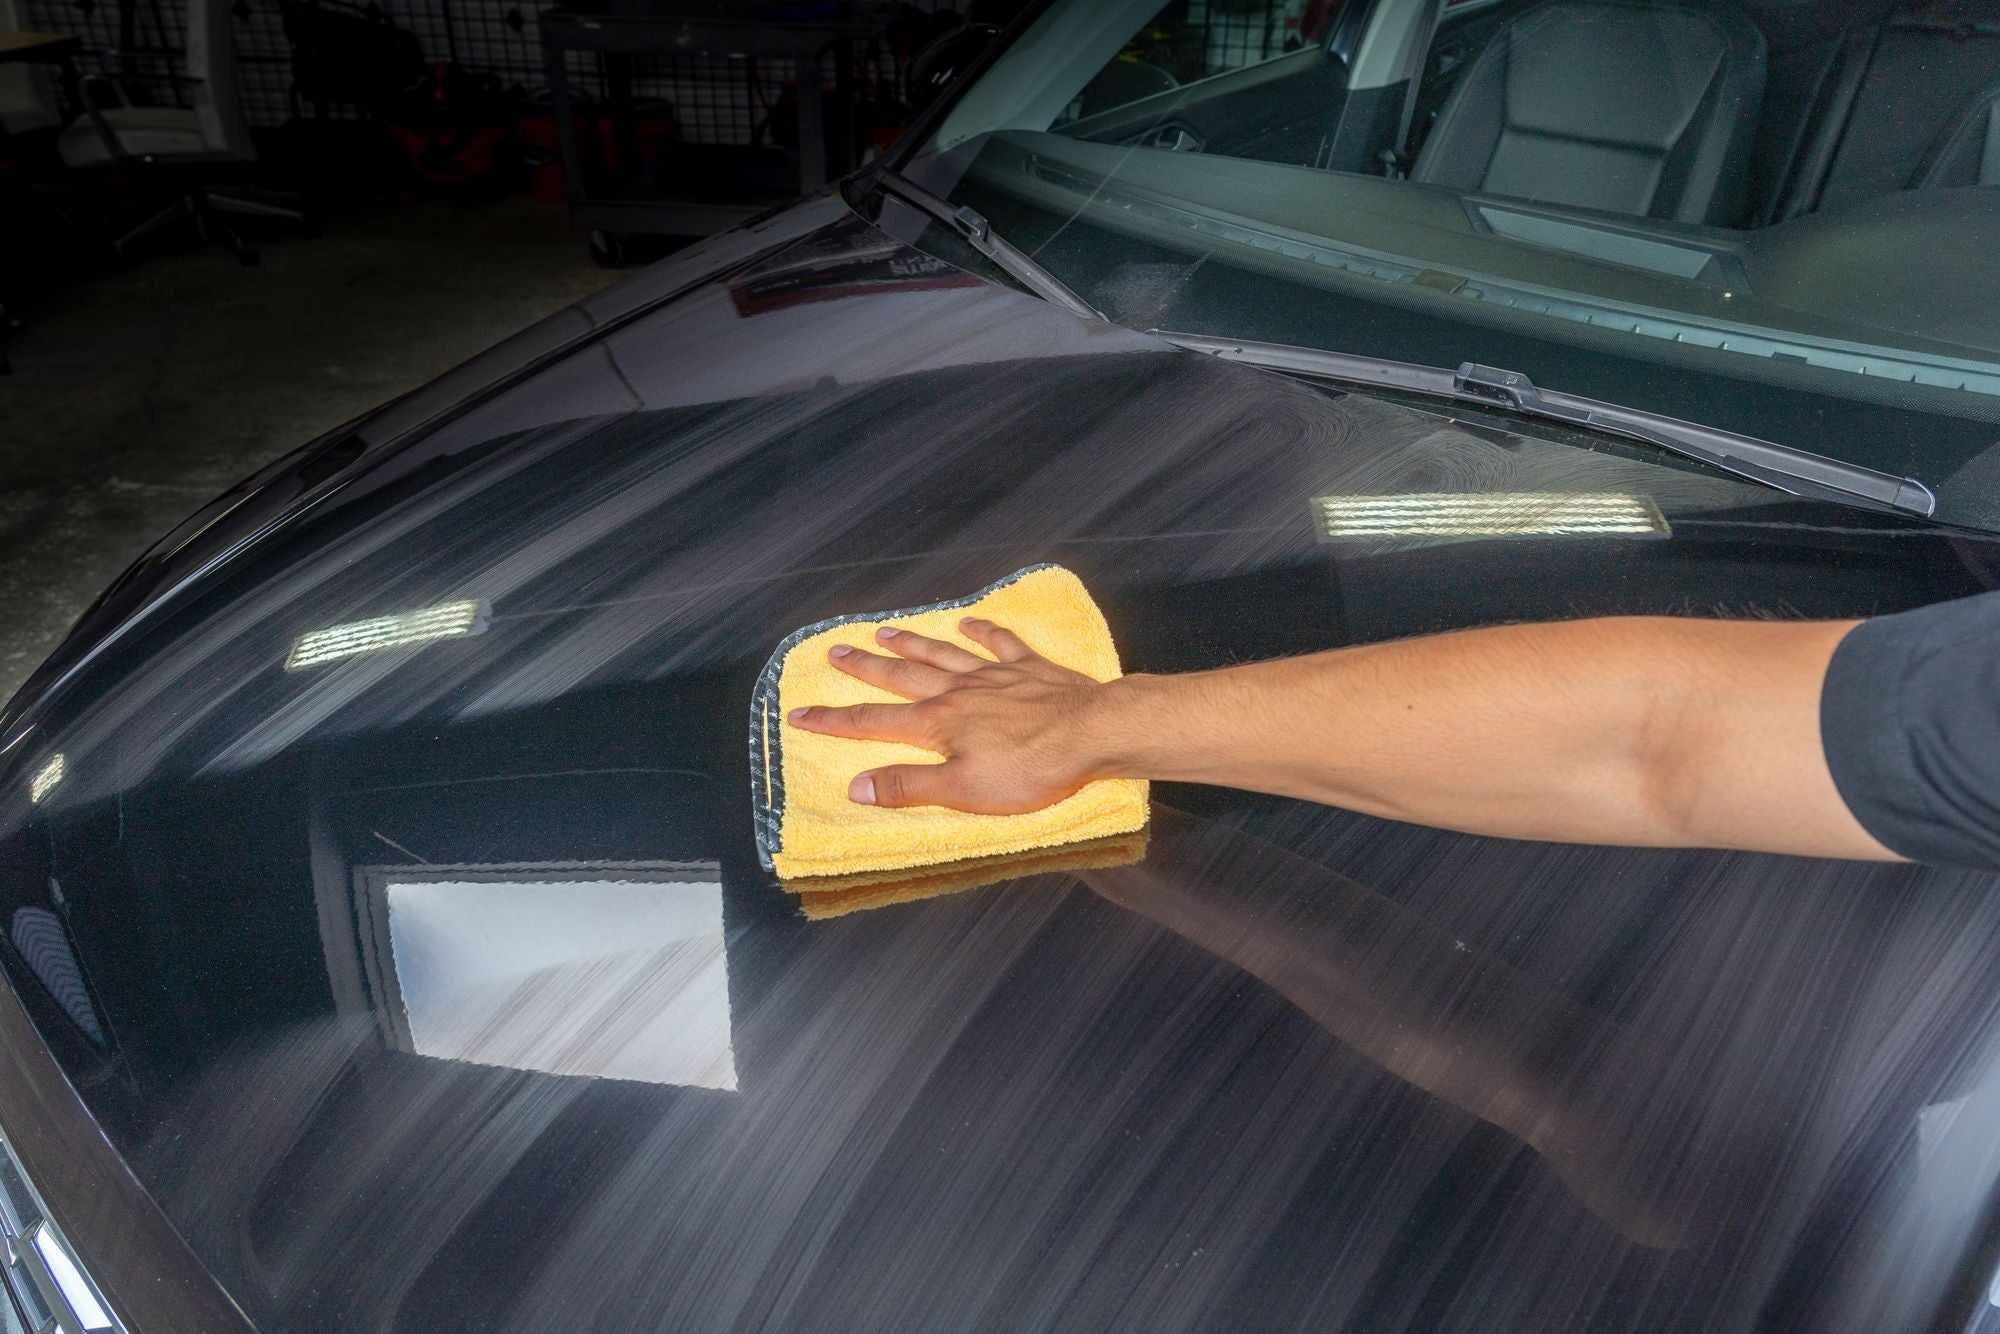 Professional Grade Microfiber Towel leaving a streak-free finish when wiping down paintwork.